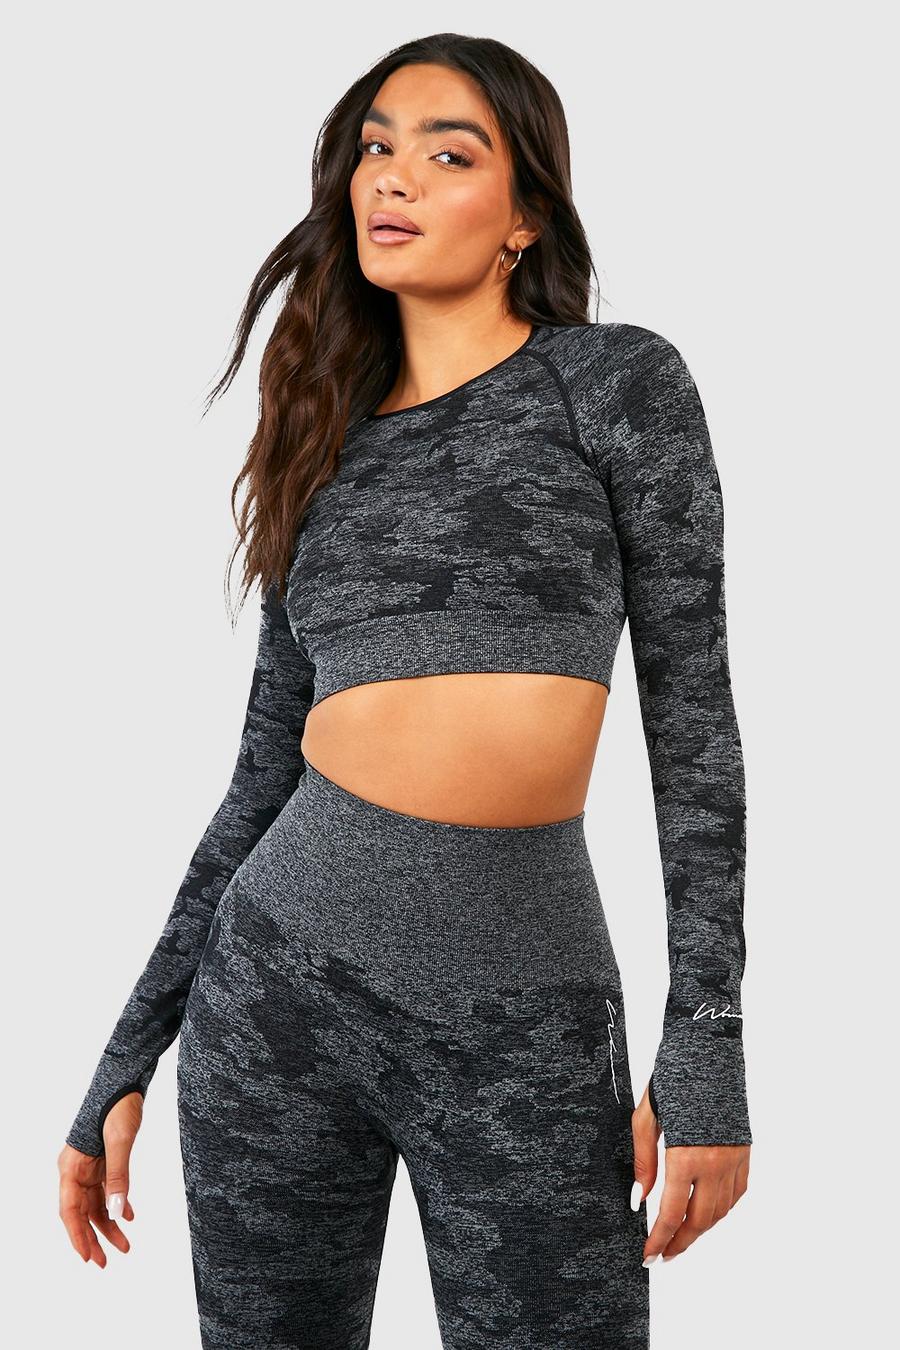 Black Fit Camo Contouring Long Sleeve Gym Crop Top image number 1